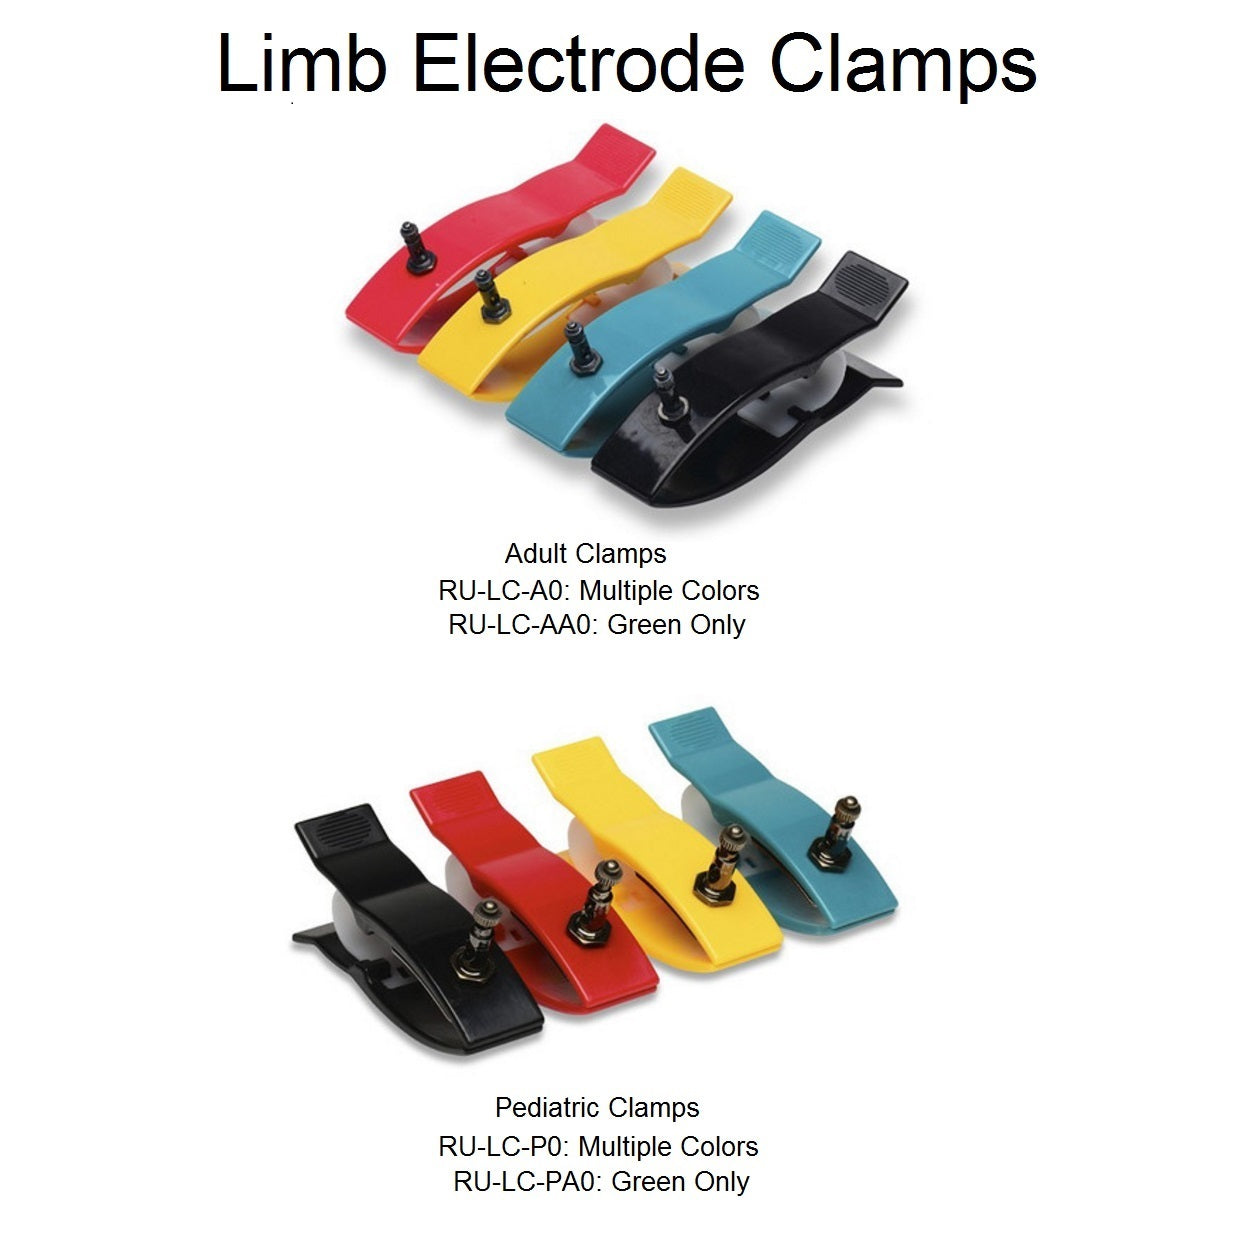 Cables and Sensors Limb Electrode Clamps